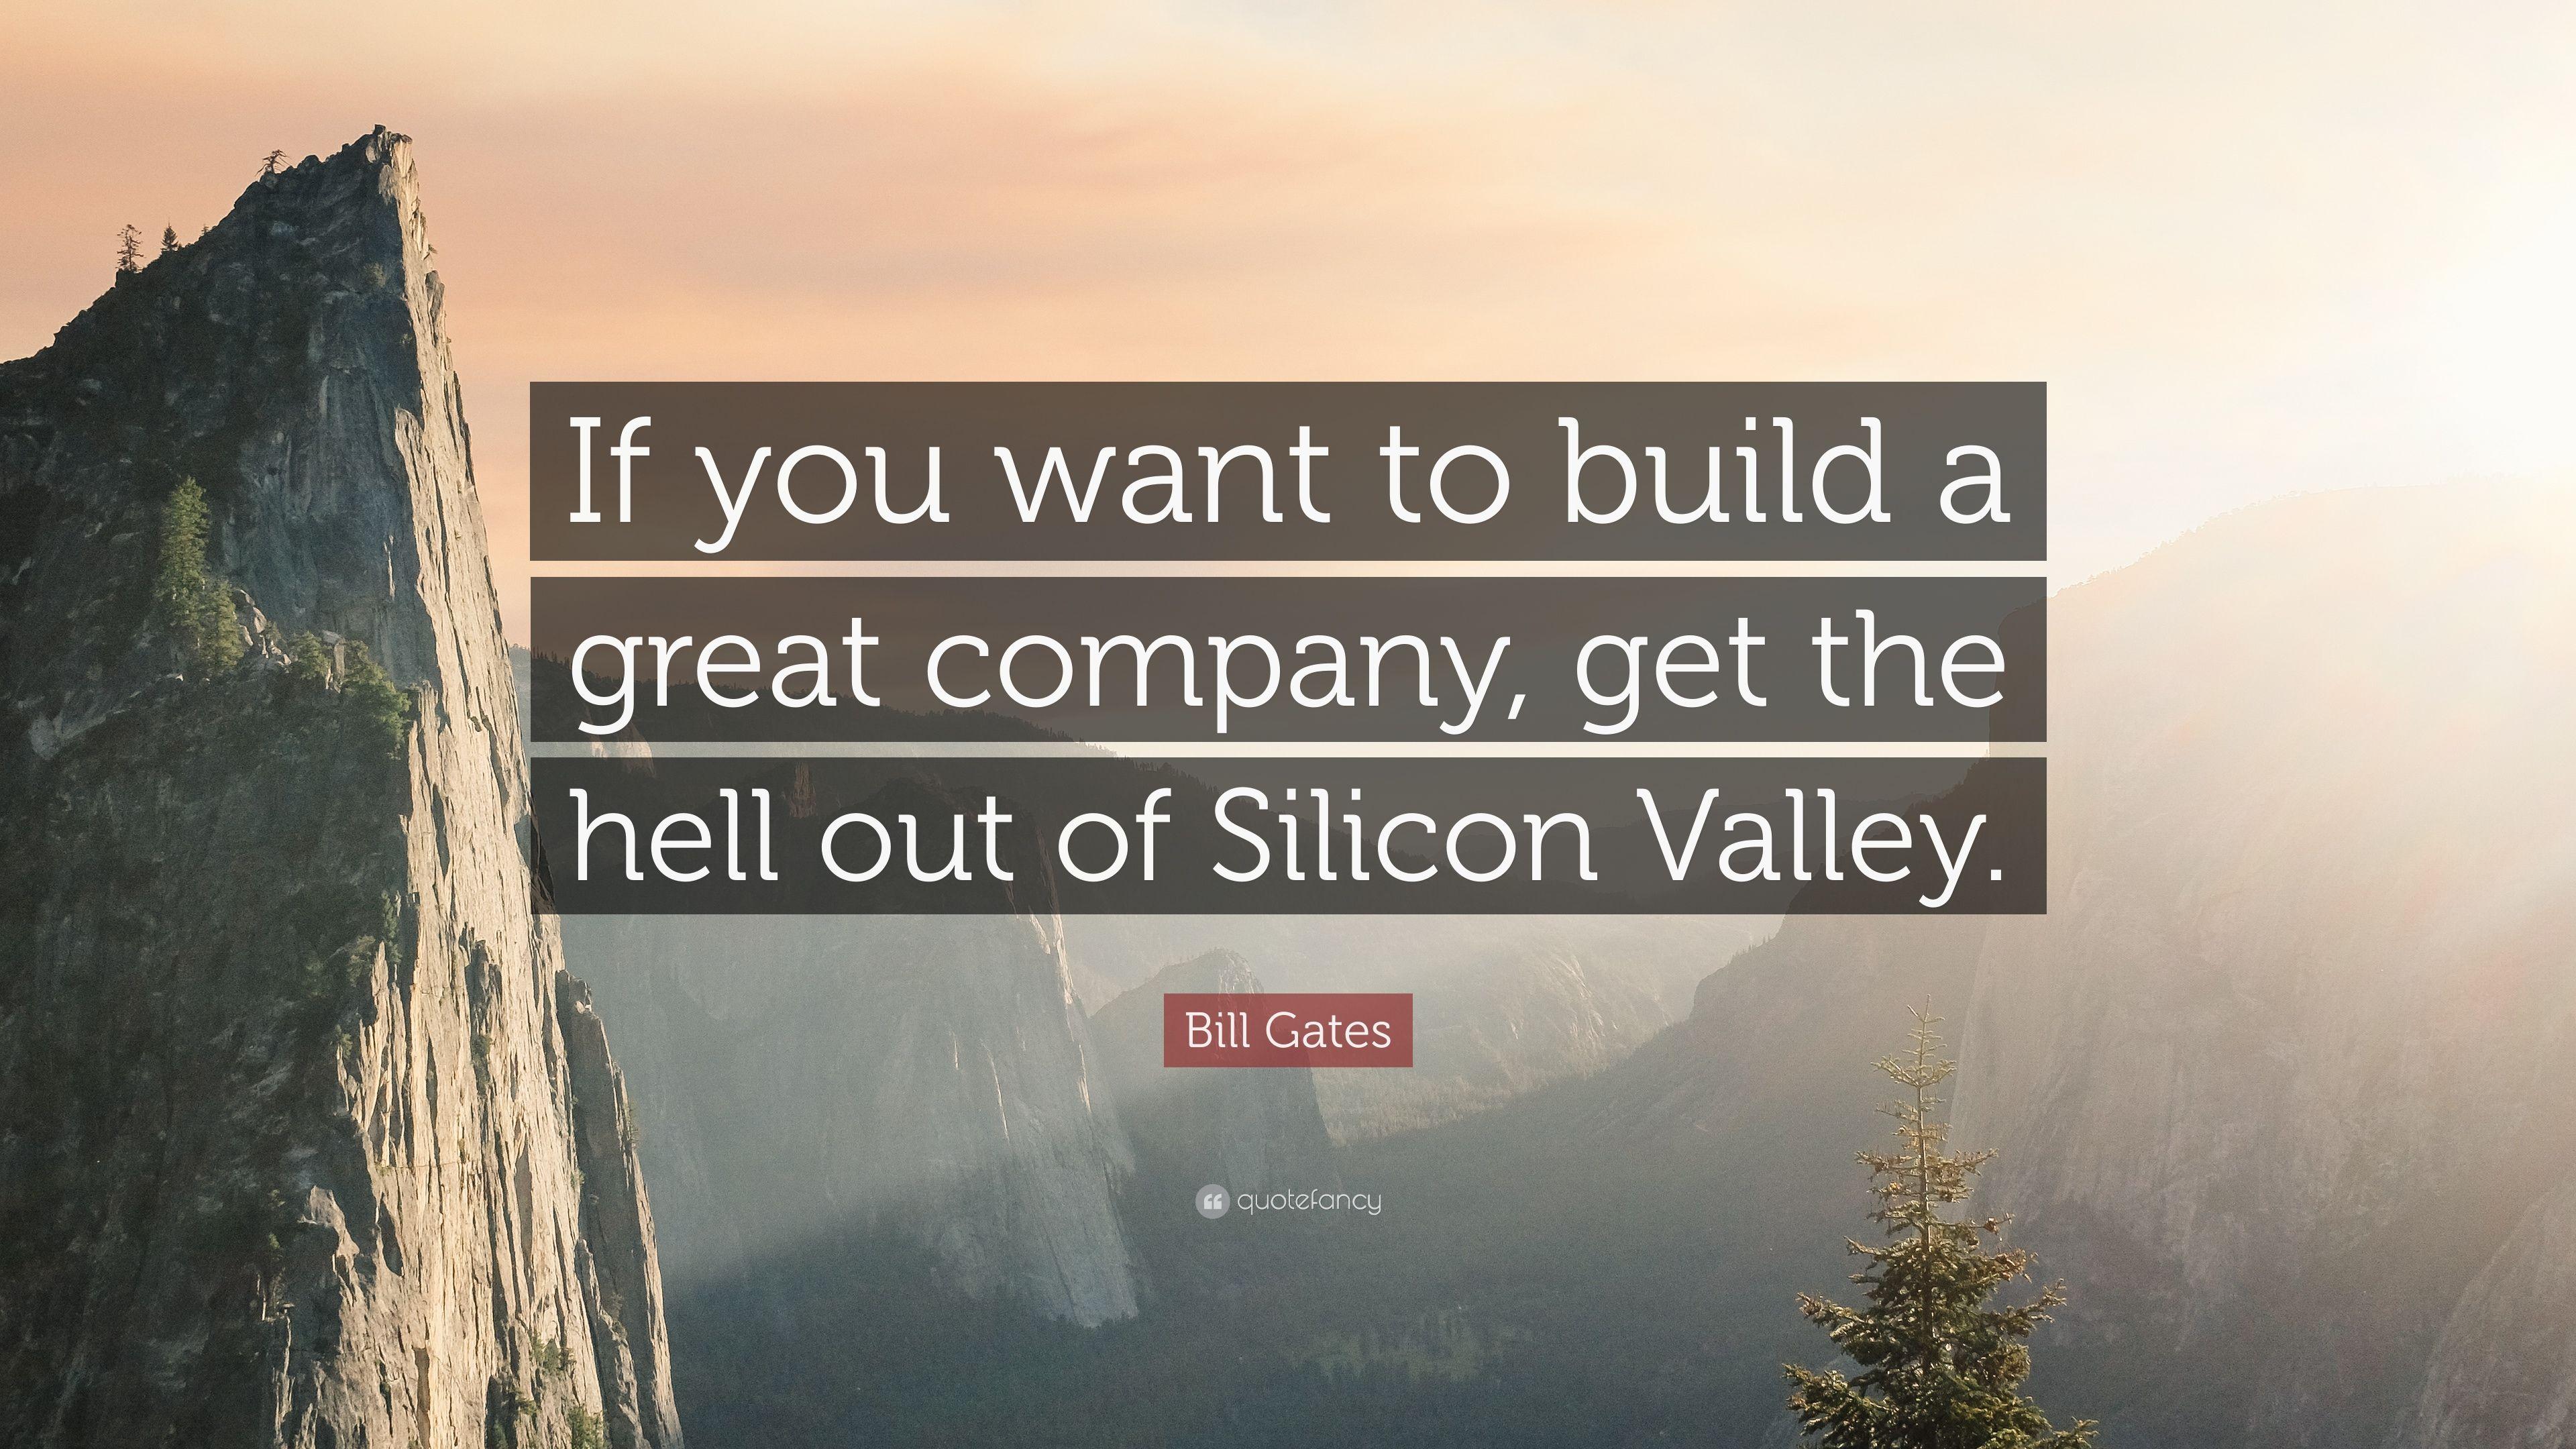 Bill Gates Quote: “If you want to build a great company, get